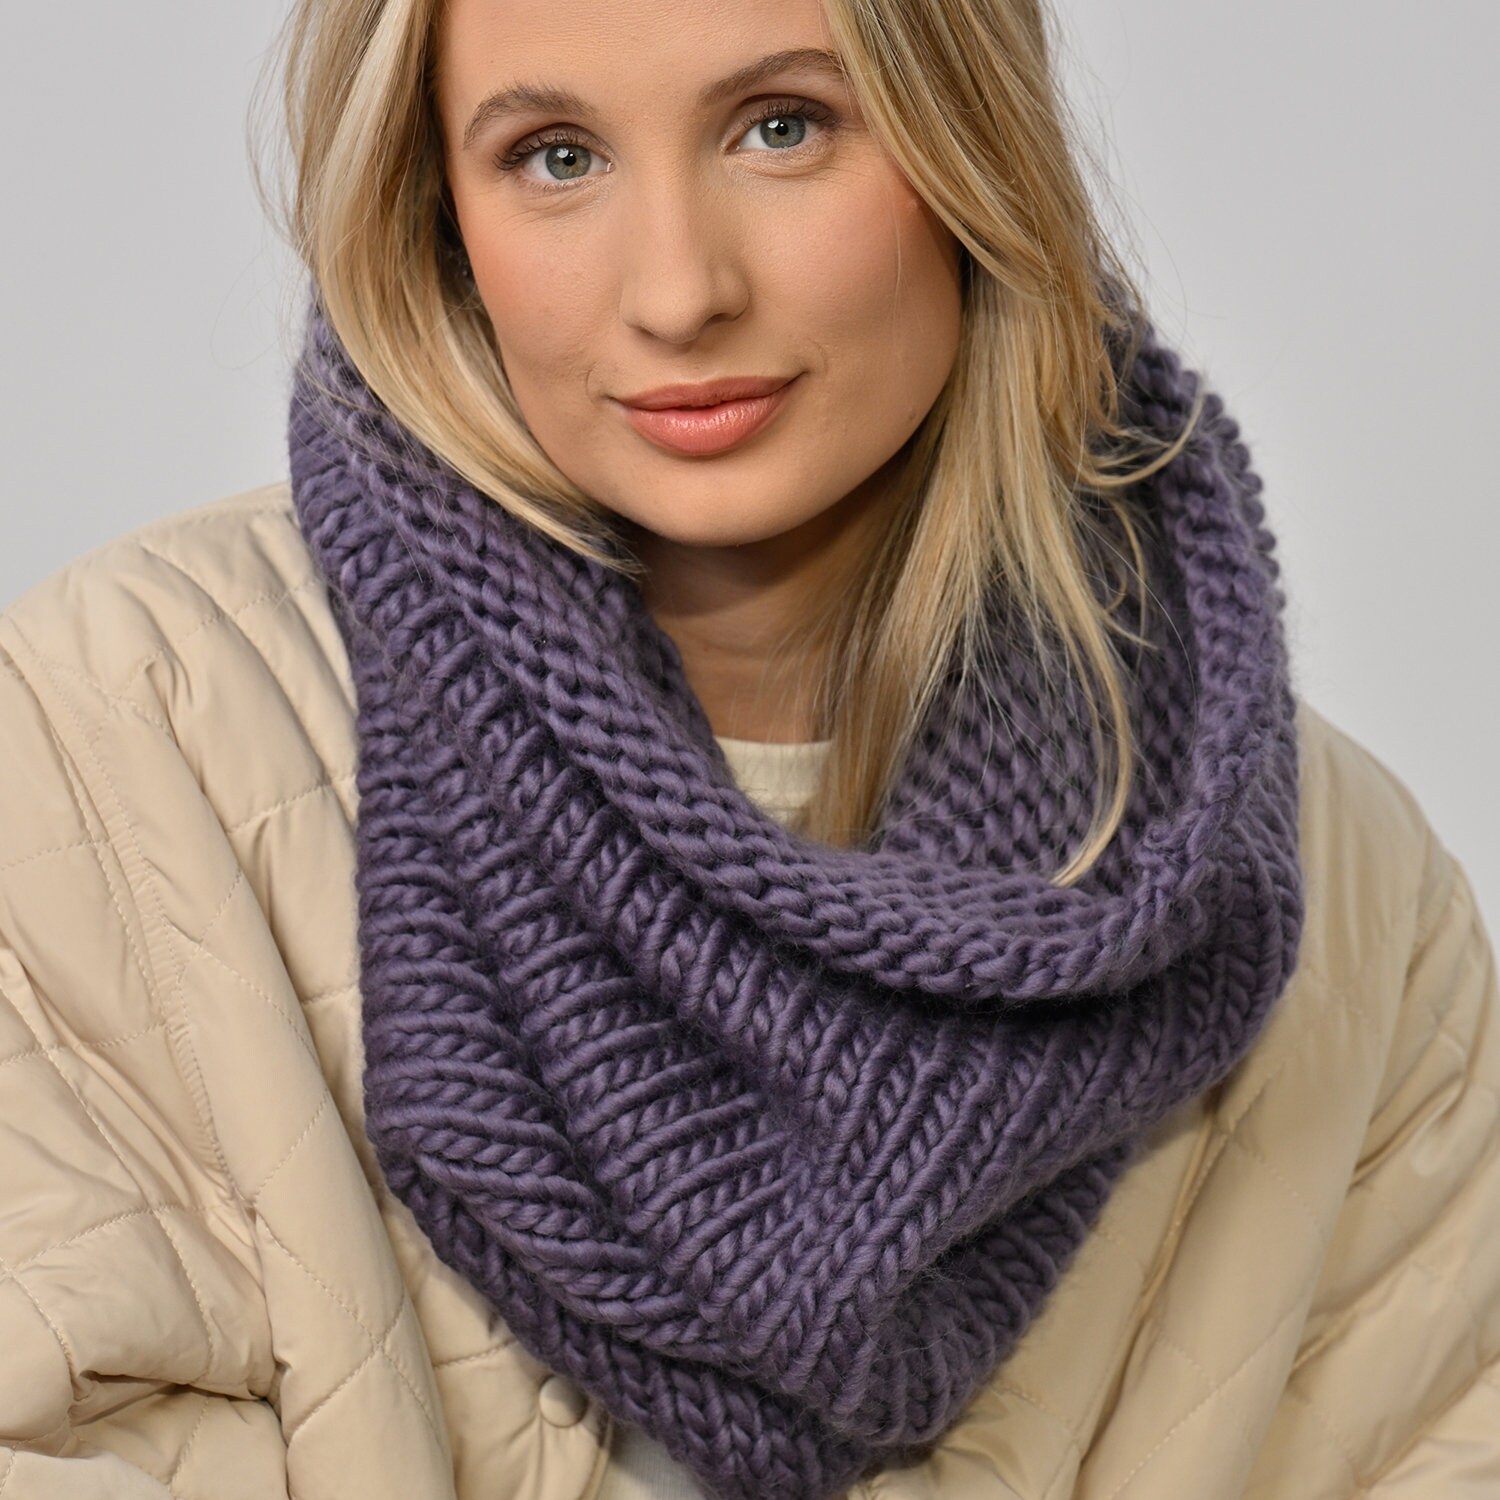 Manitoba Snood : learn to knit kit with video course for absolute